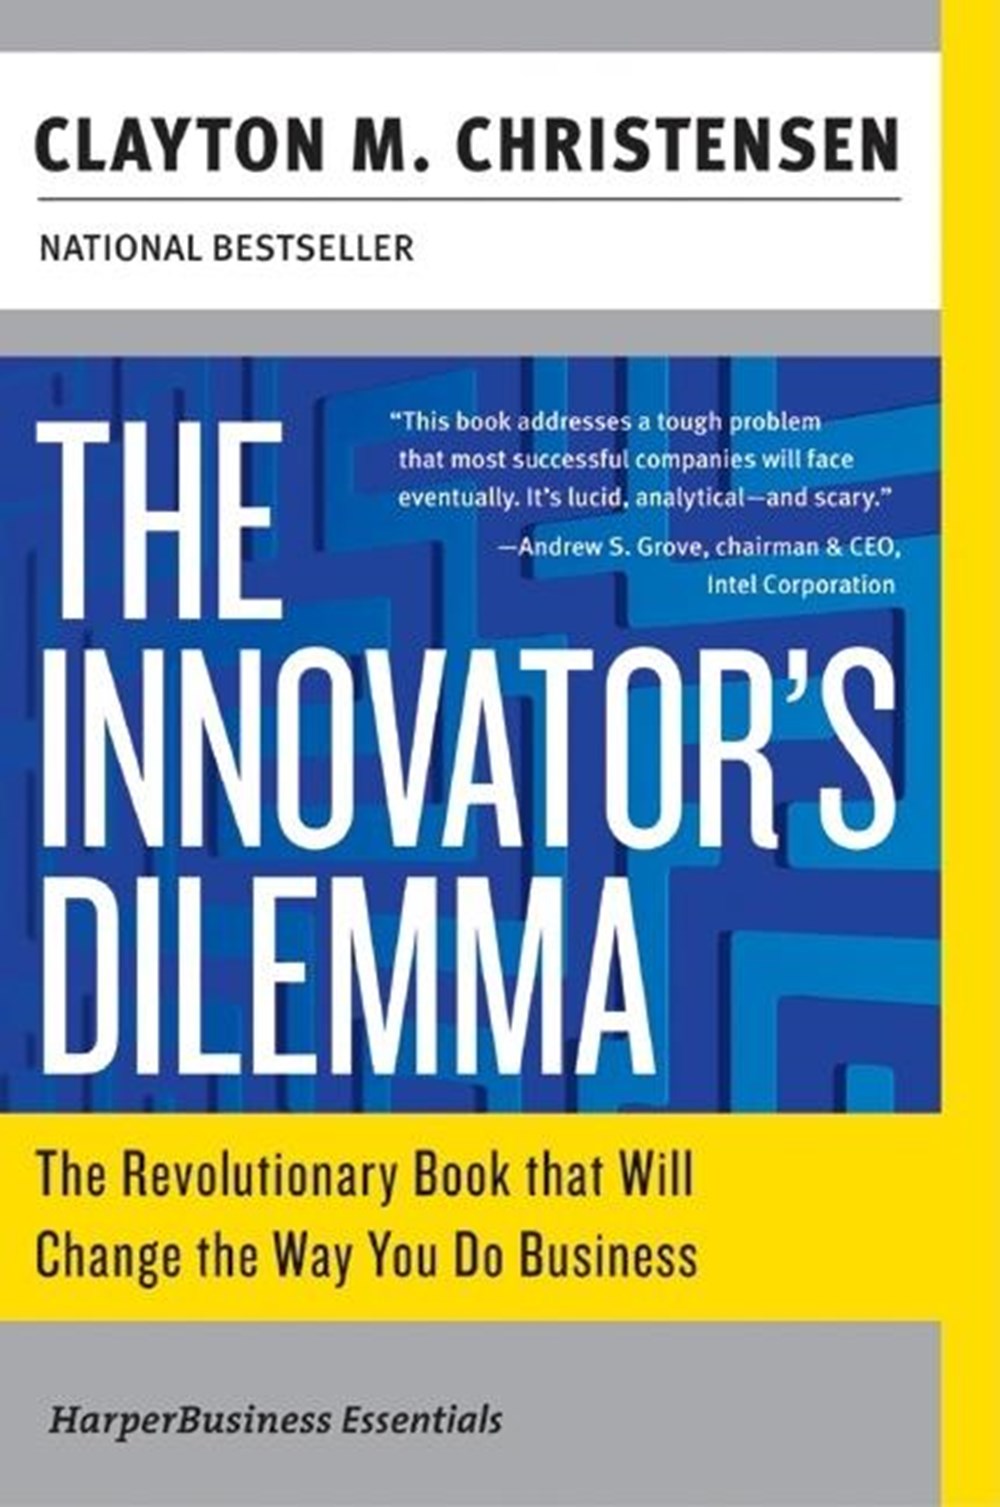 Innovator's Dilemma: The Revolutionary Book That Will Change the Way You Do Business